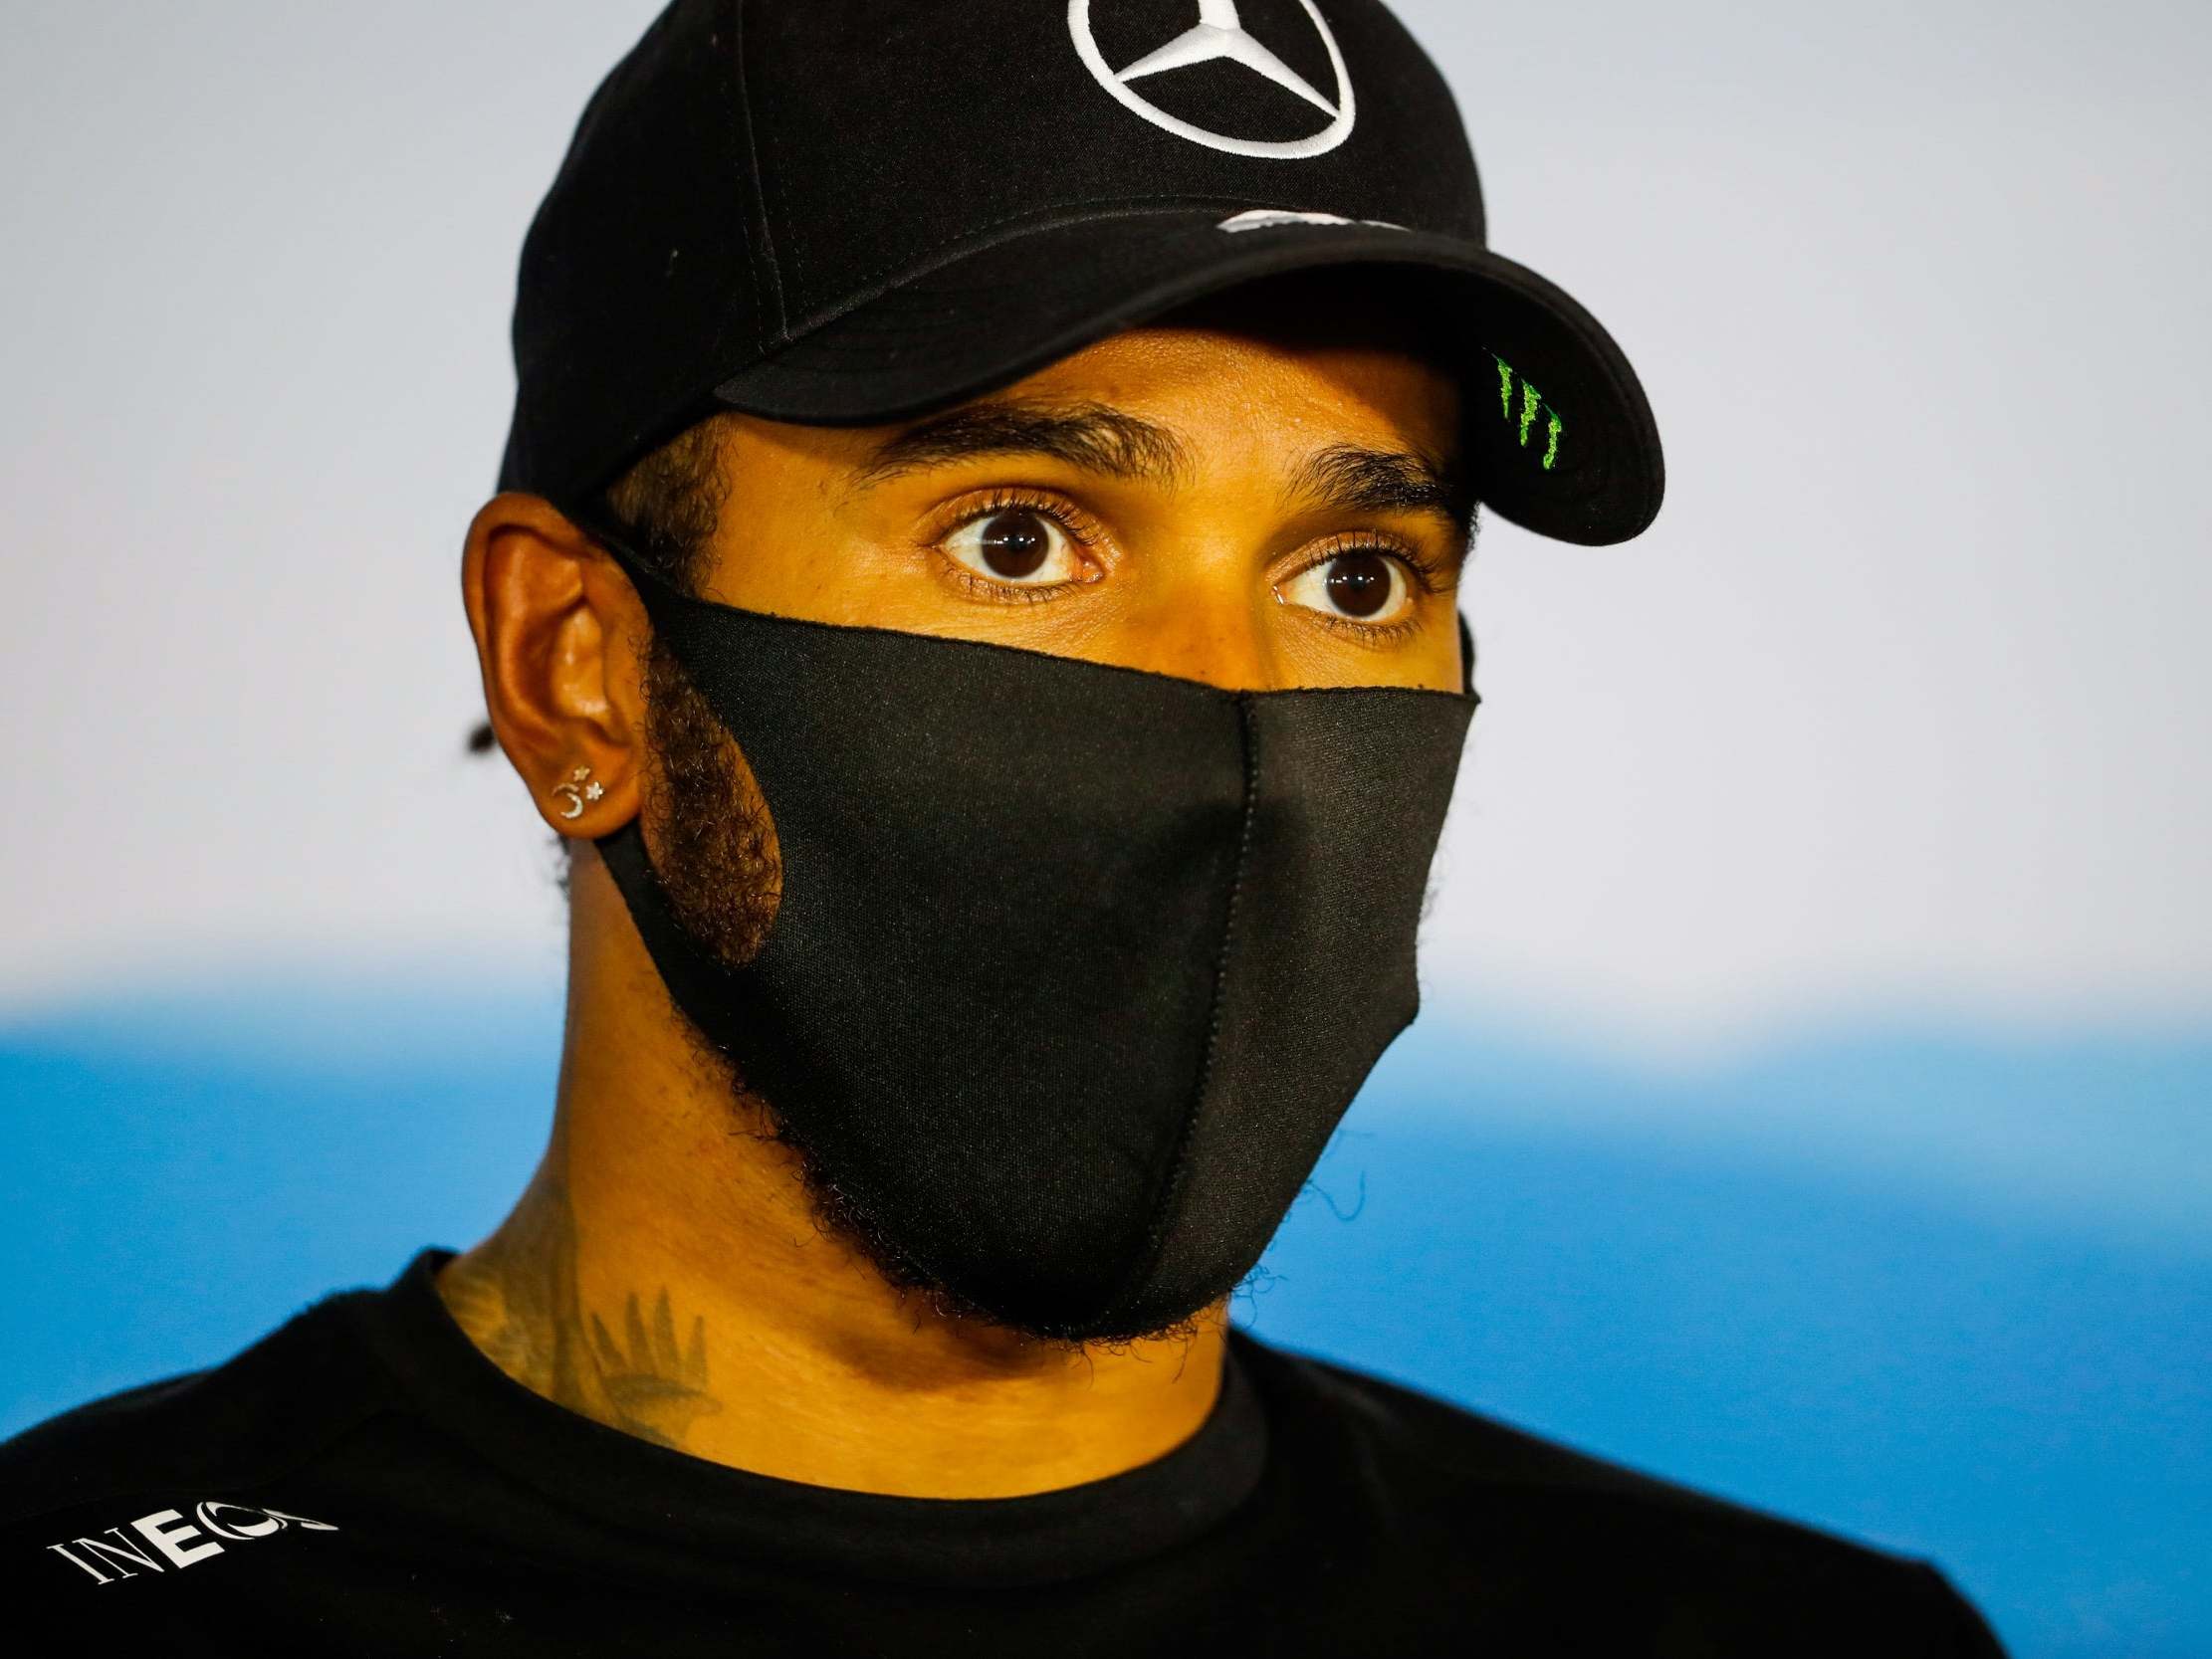 Lewis Hamilton has come under fire from senior figures in the sport